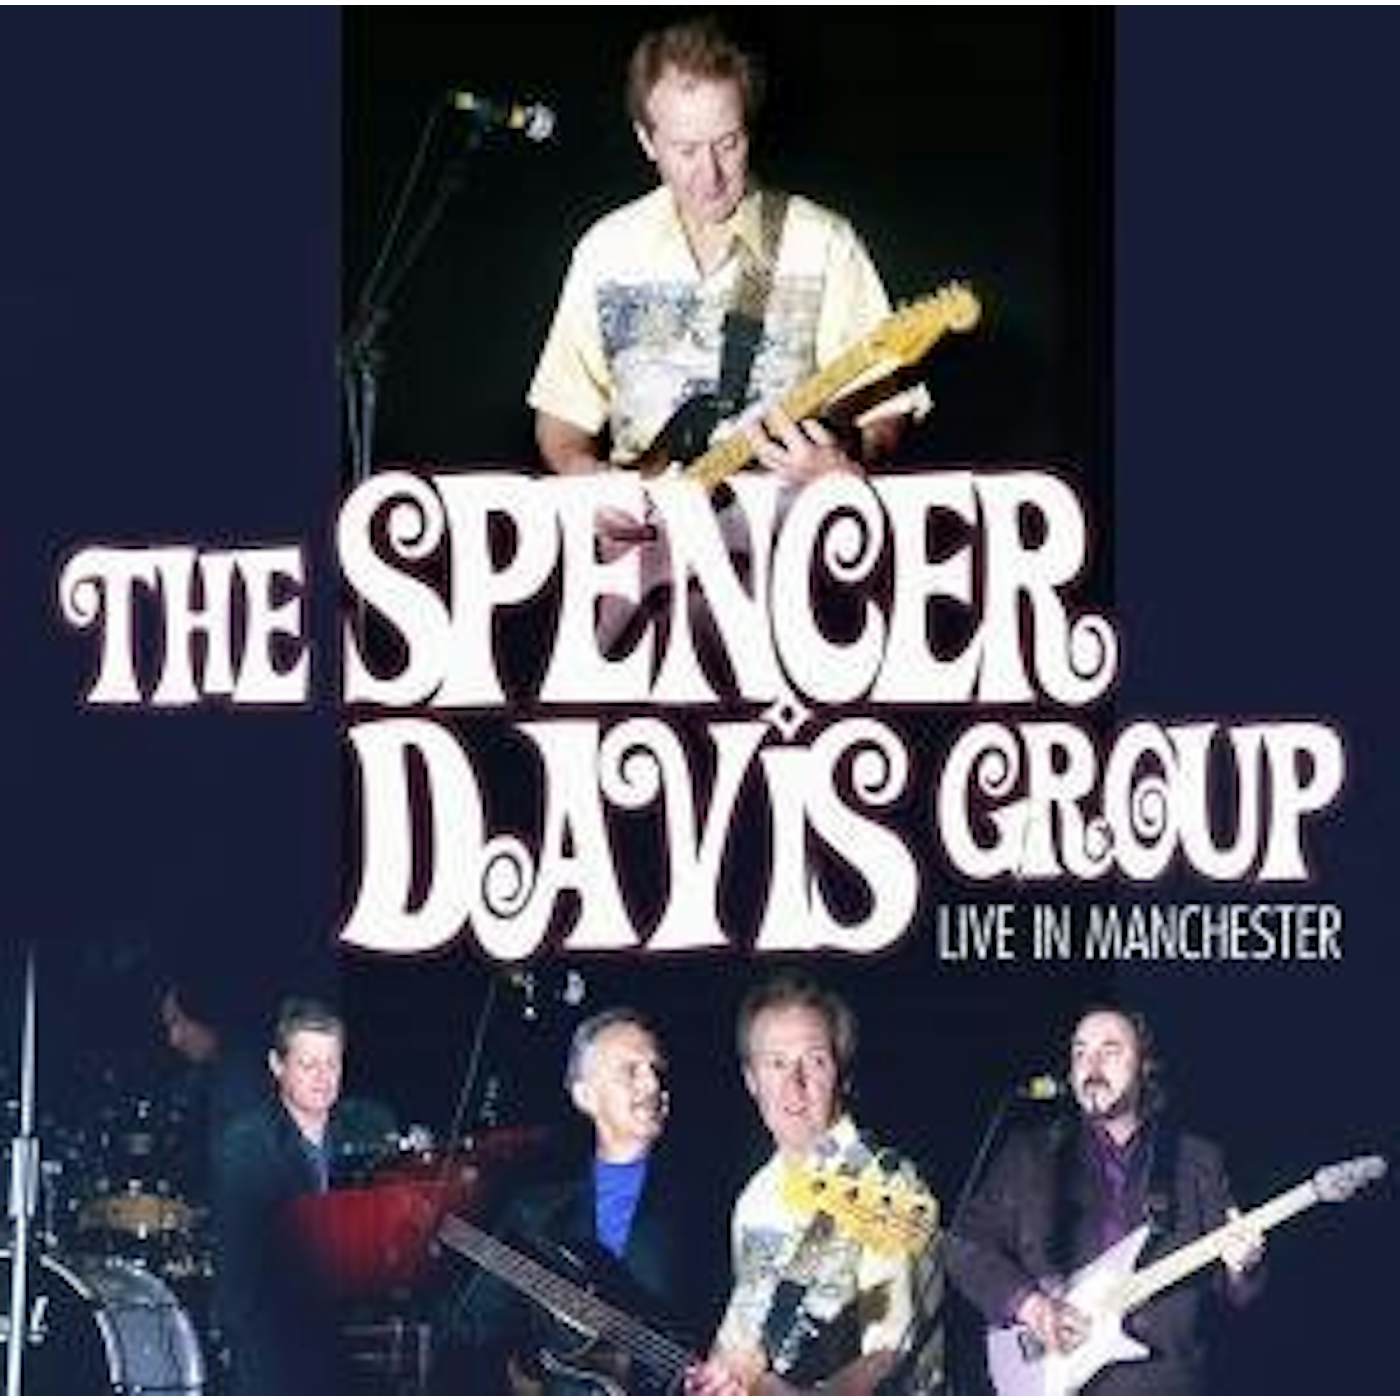 The Spencer Davis Group LIVE IN MANCHESTER CD